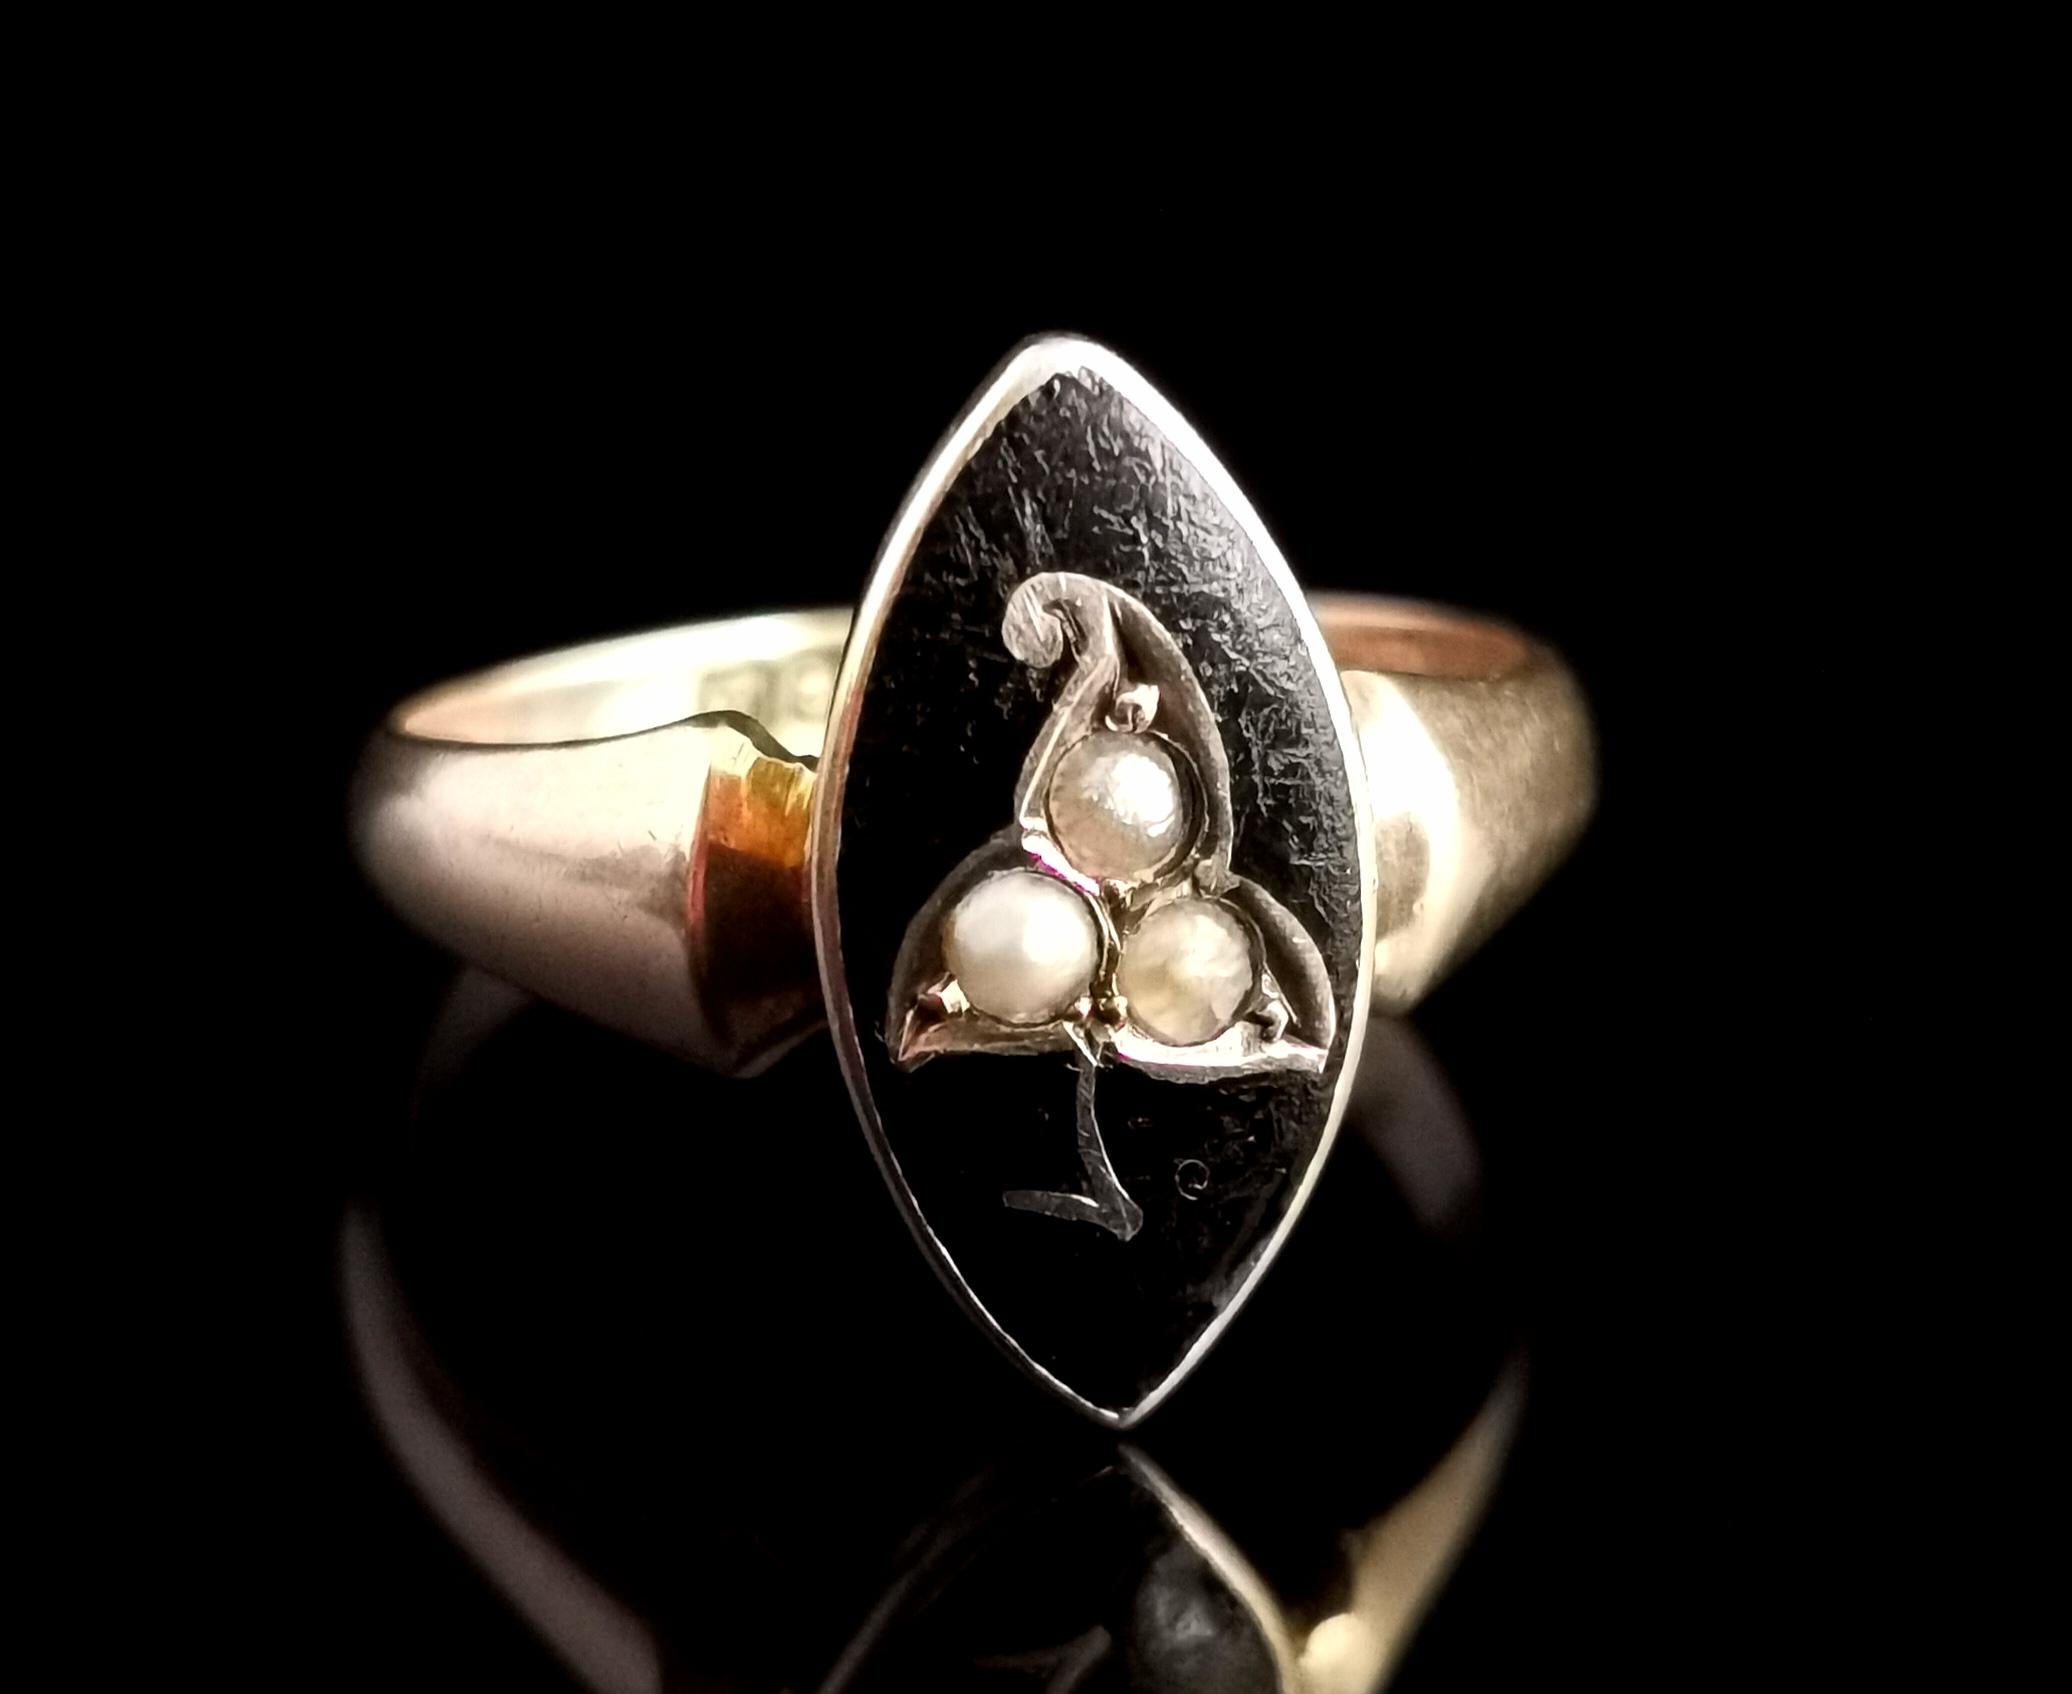 A beautiful antique early Art Deco era mourning ring

It is a navette shaped ring with an elongated central black enamelled panel set with three split pearls, the pearls arranged to form an ivy leaf.

It has chunky raised shoulders and a smooth